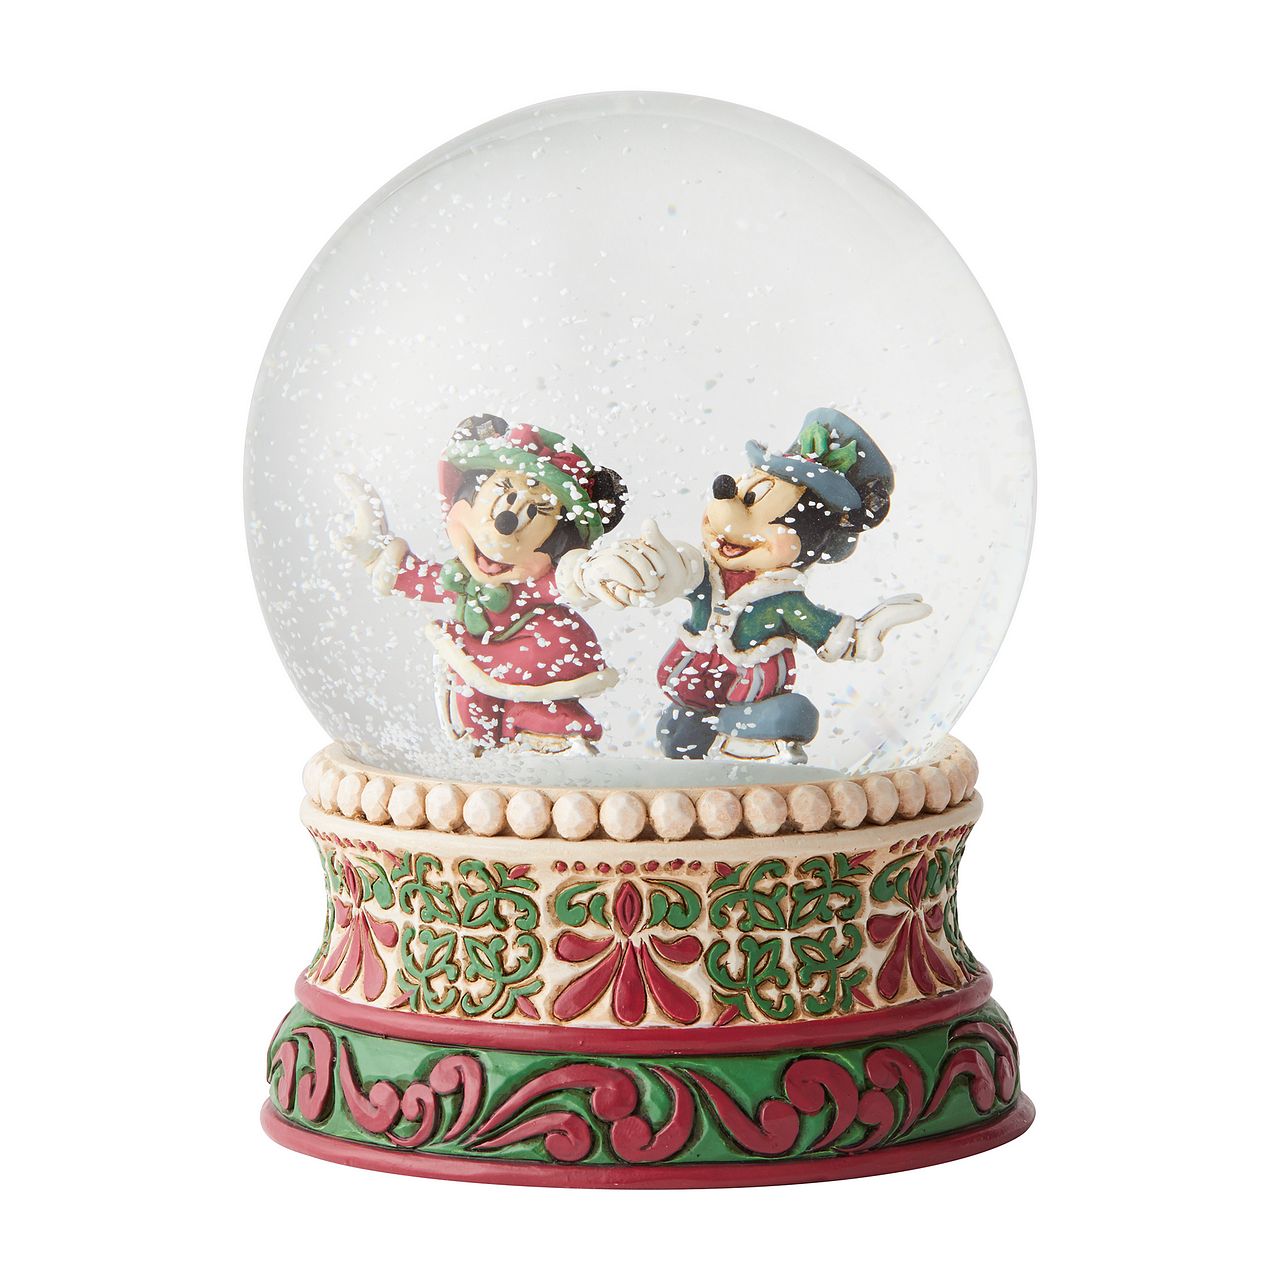 Jim Shore Splendid Skaters - Victorian Mickey and Minnie Mouse Waterball  Mickey and Minnie Mouse are filled with Christmas spirit as they ice skate in this victorian inspired waterball. Unique variations should be expected as this product is hand painted.